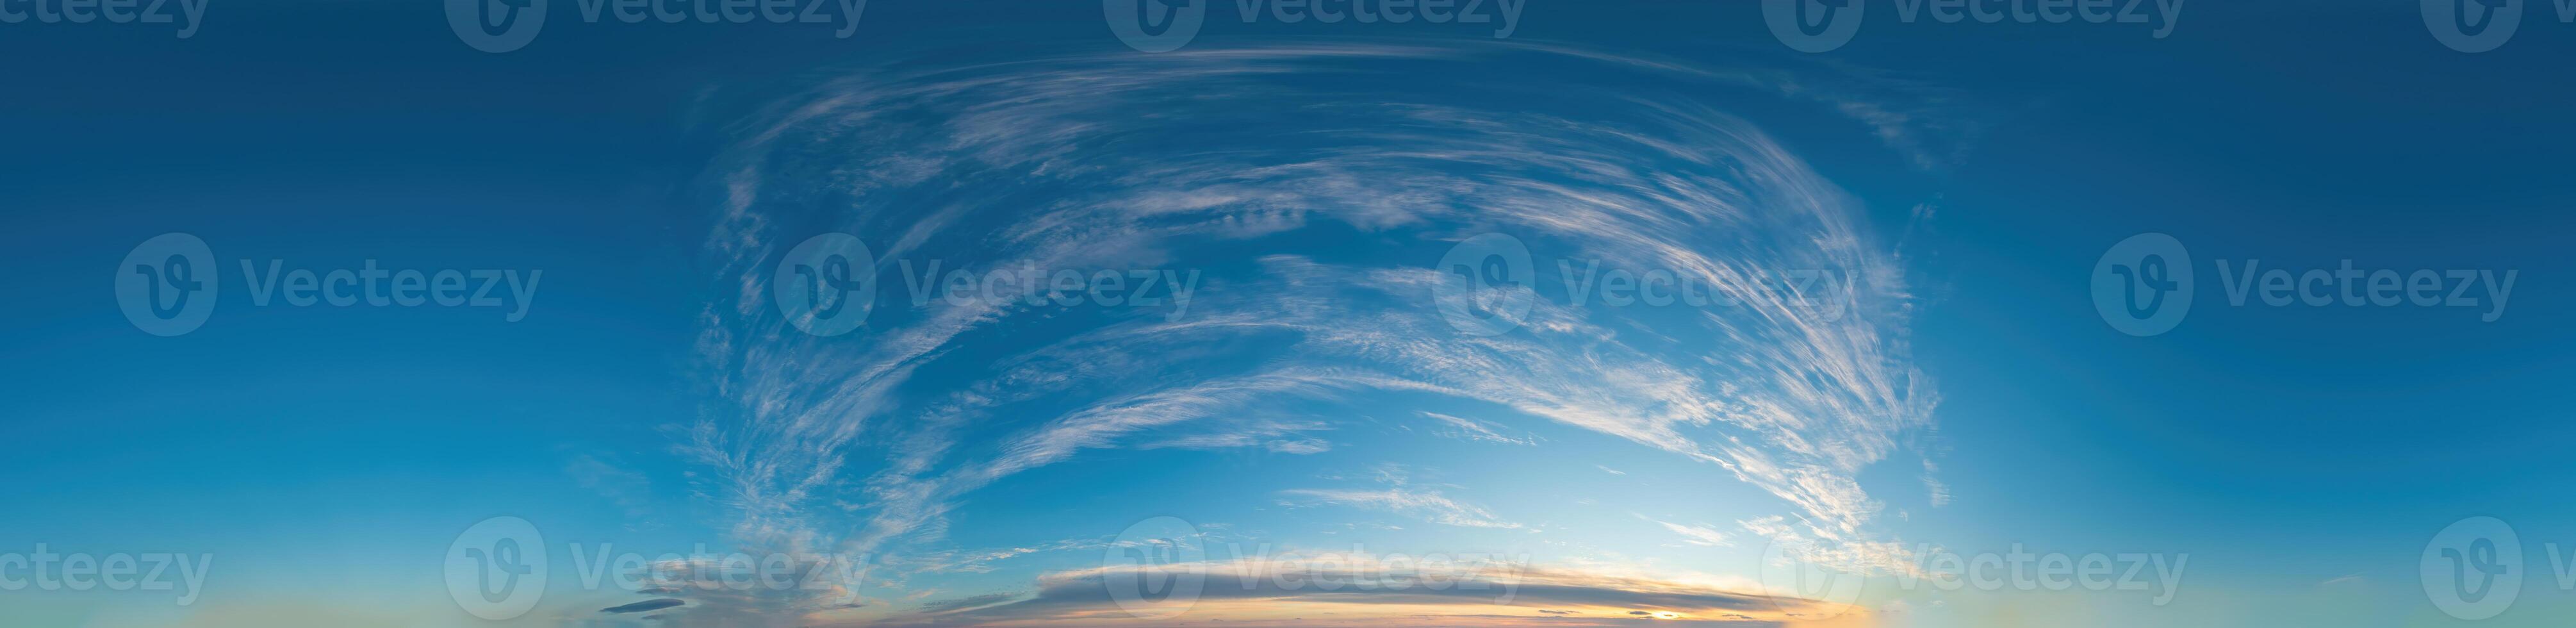 Blue sky panorama with Cirrus clouds in Seamless spherical equirectangular format. Full zenith for use in 3D graphics, game and editing aerial drone 360 degree panoramas for sky replacement. photo